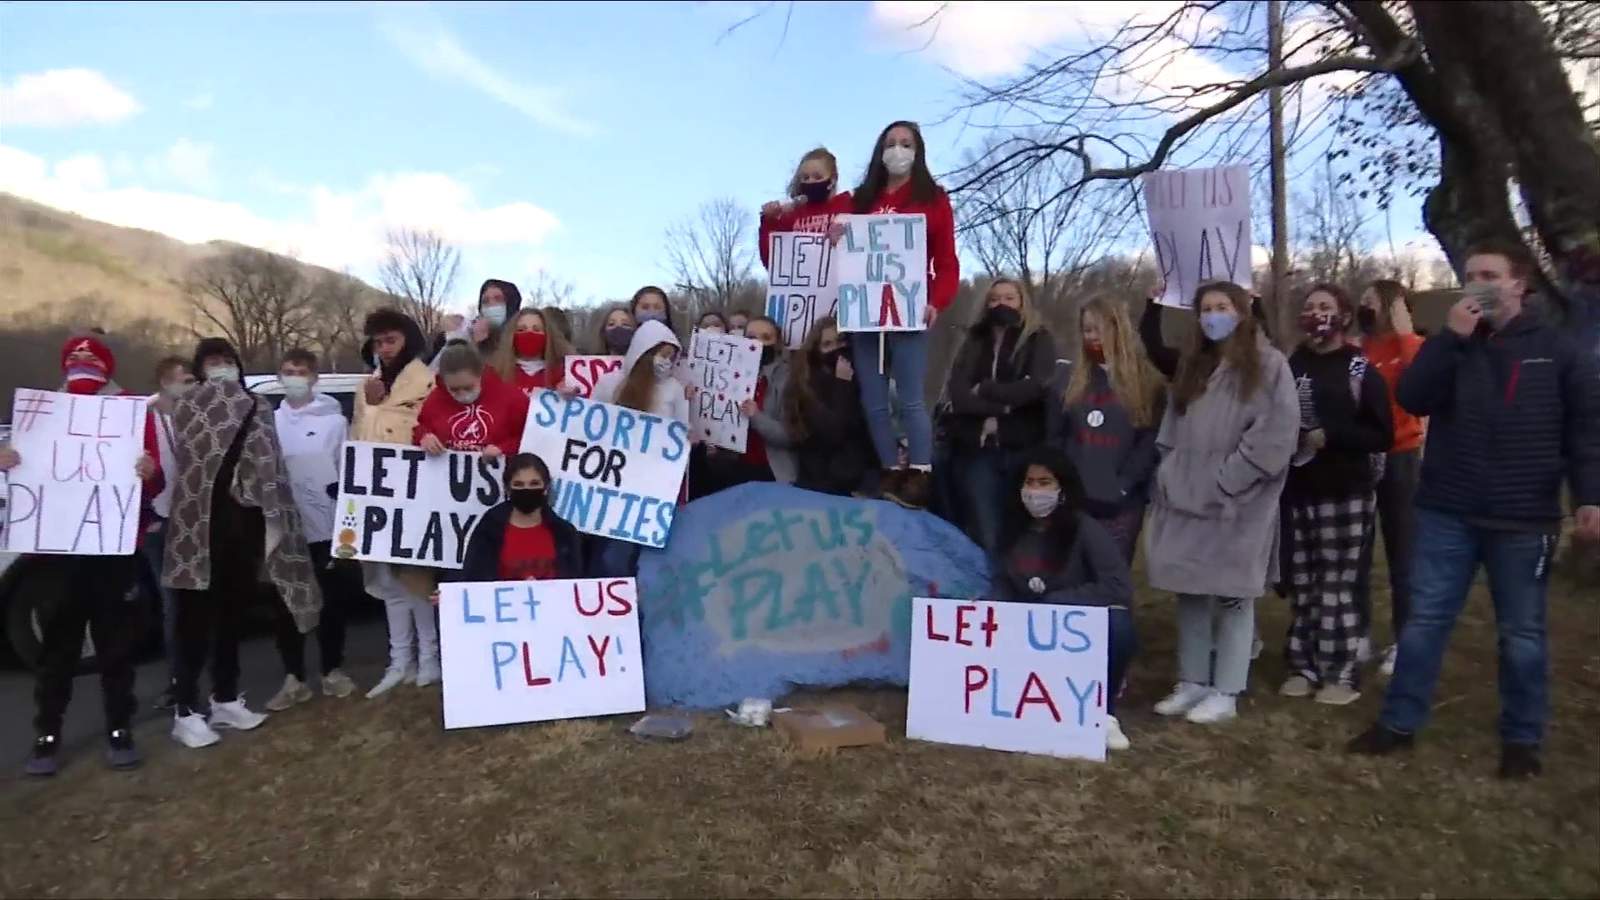 ‘Let us play’: Alleghany High School students protest postponed sports season